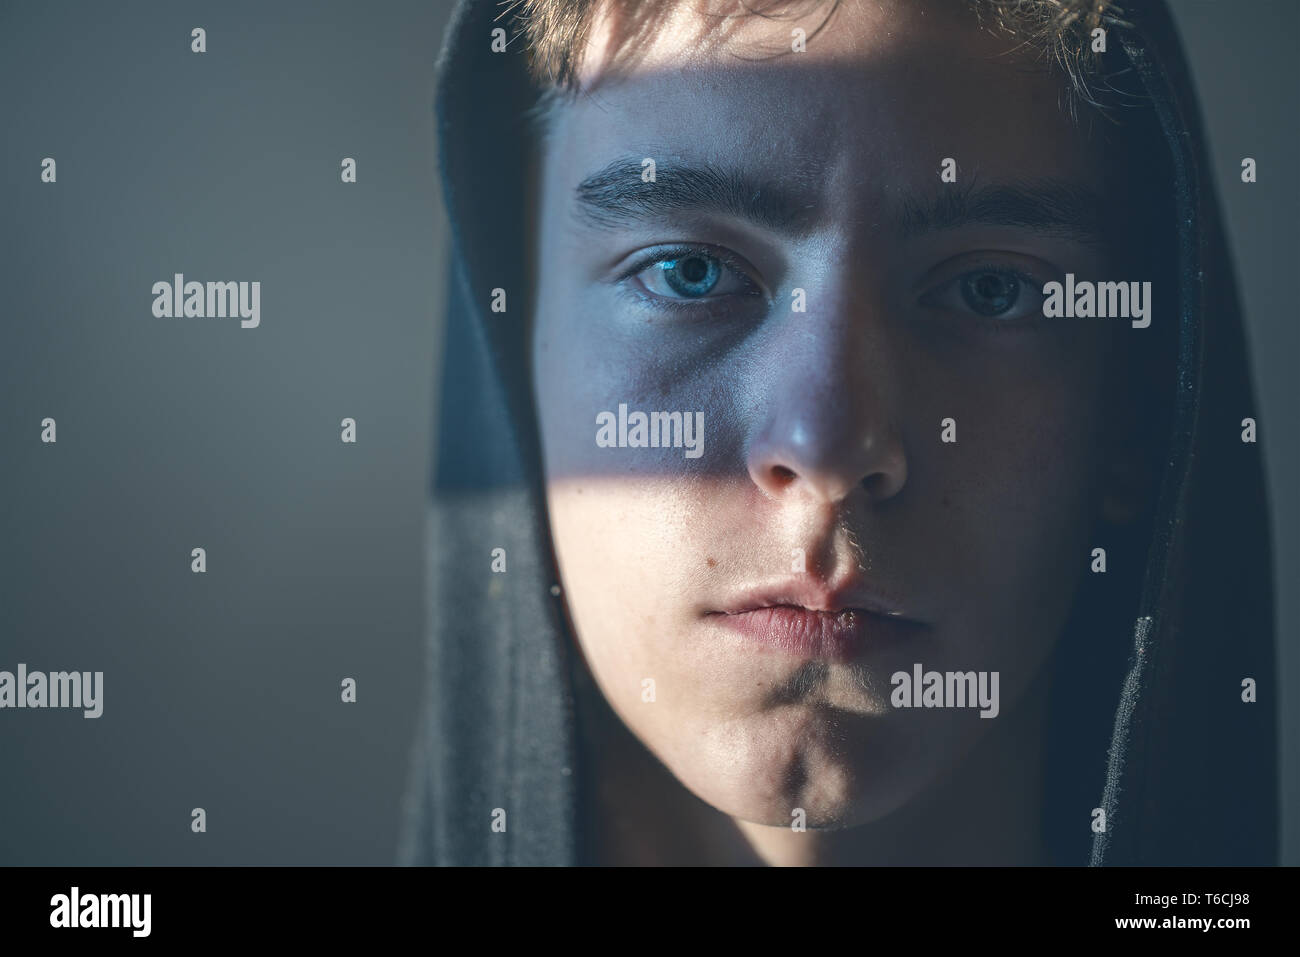 close up portrait of a young man with hoodie Stock Photo